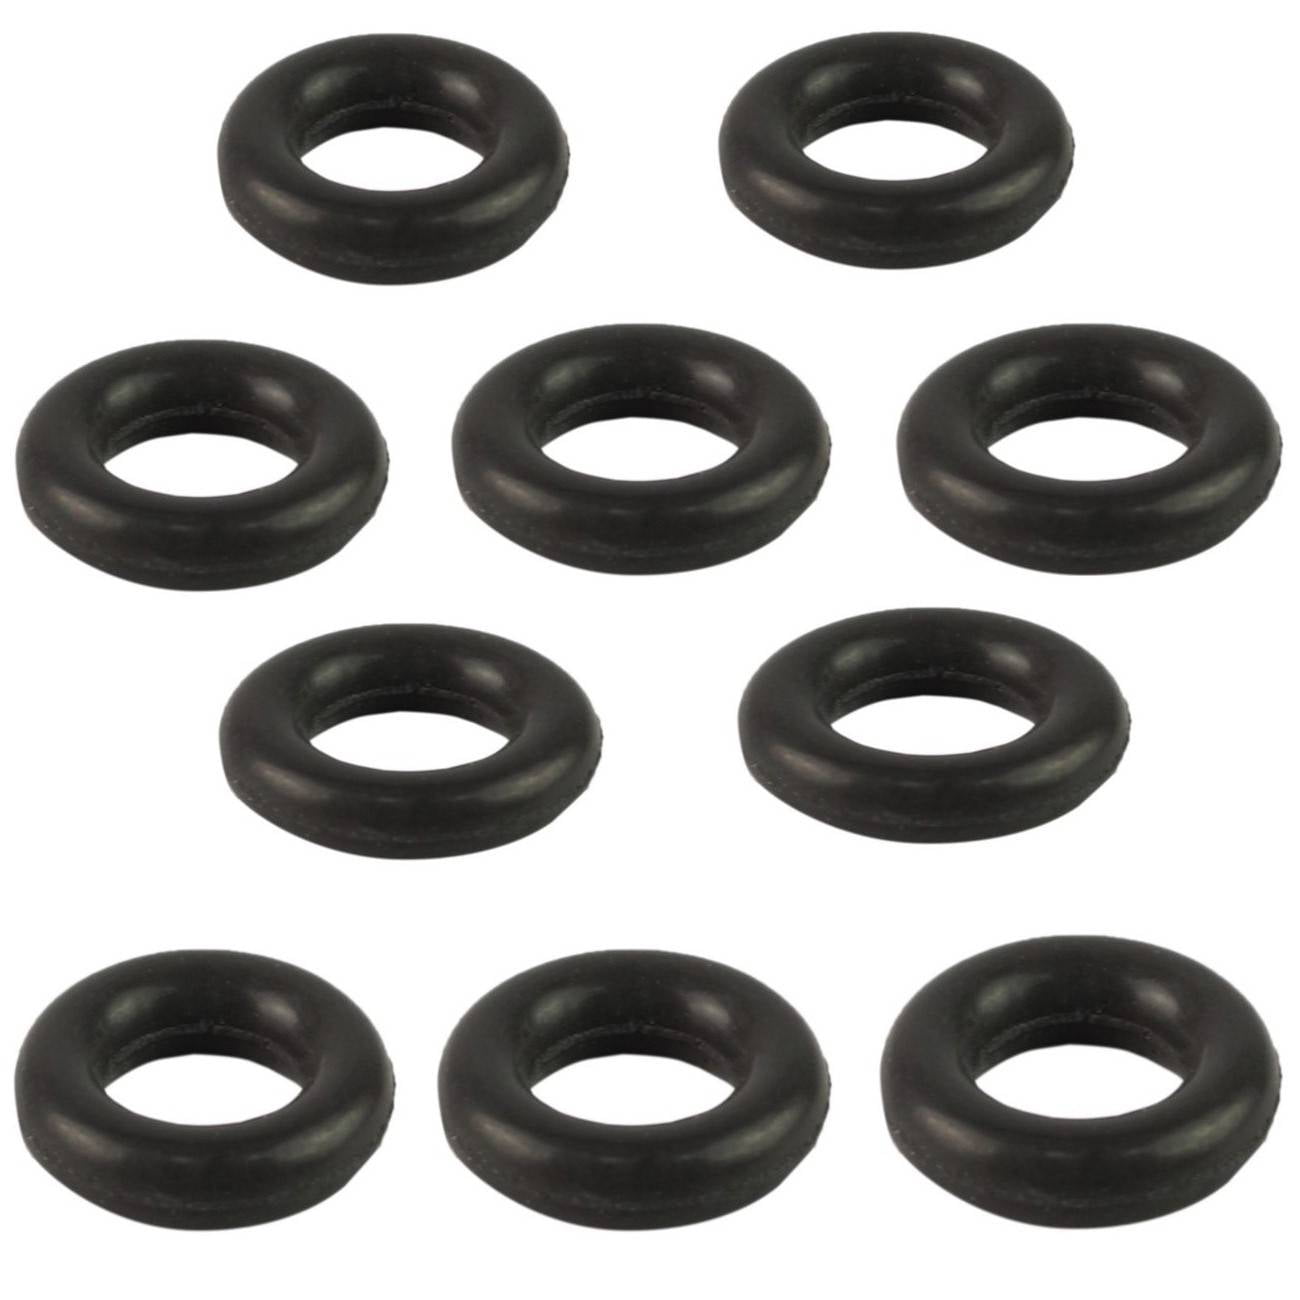 Ford F Super Duty 1988-97 Fuel Injector Rebuild/Repair Kit O-Rings Filters